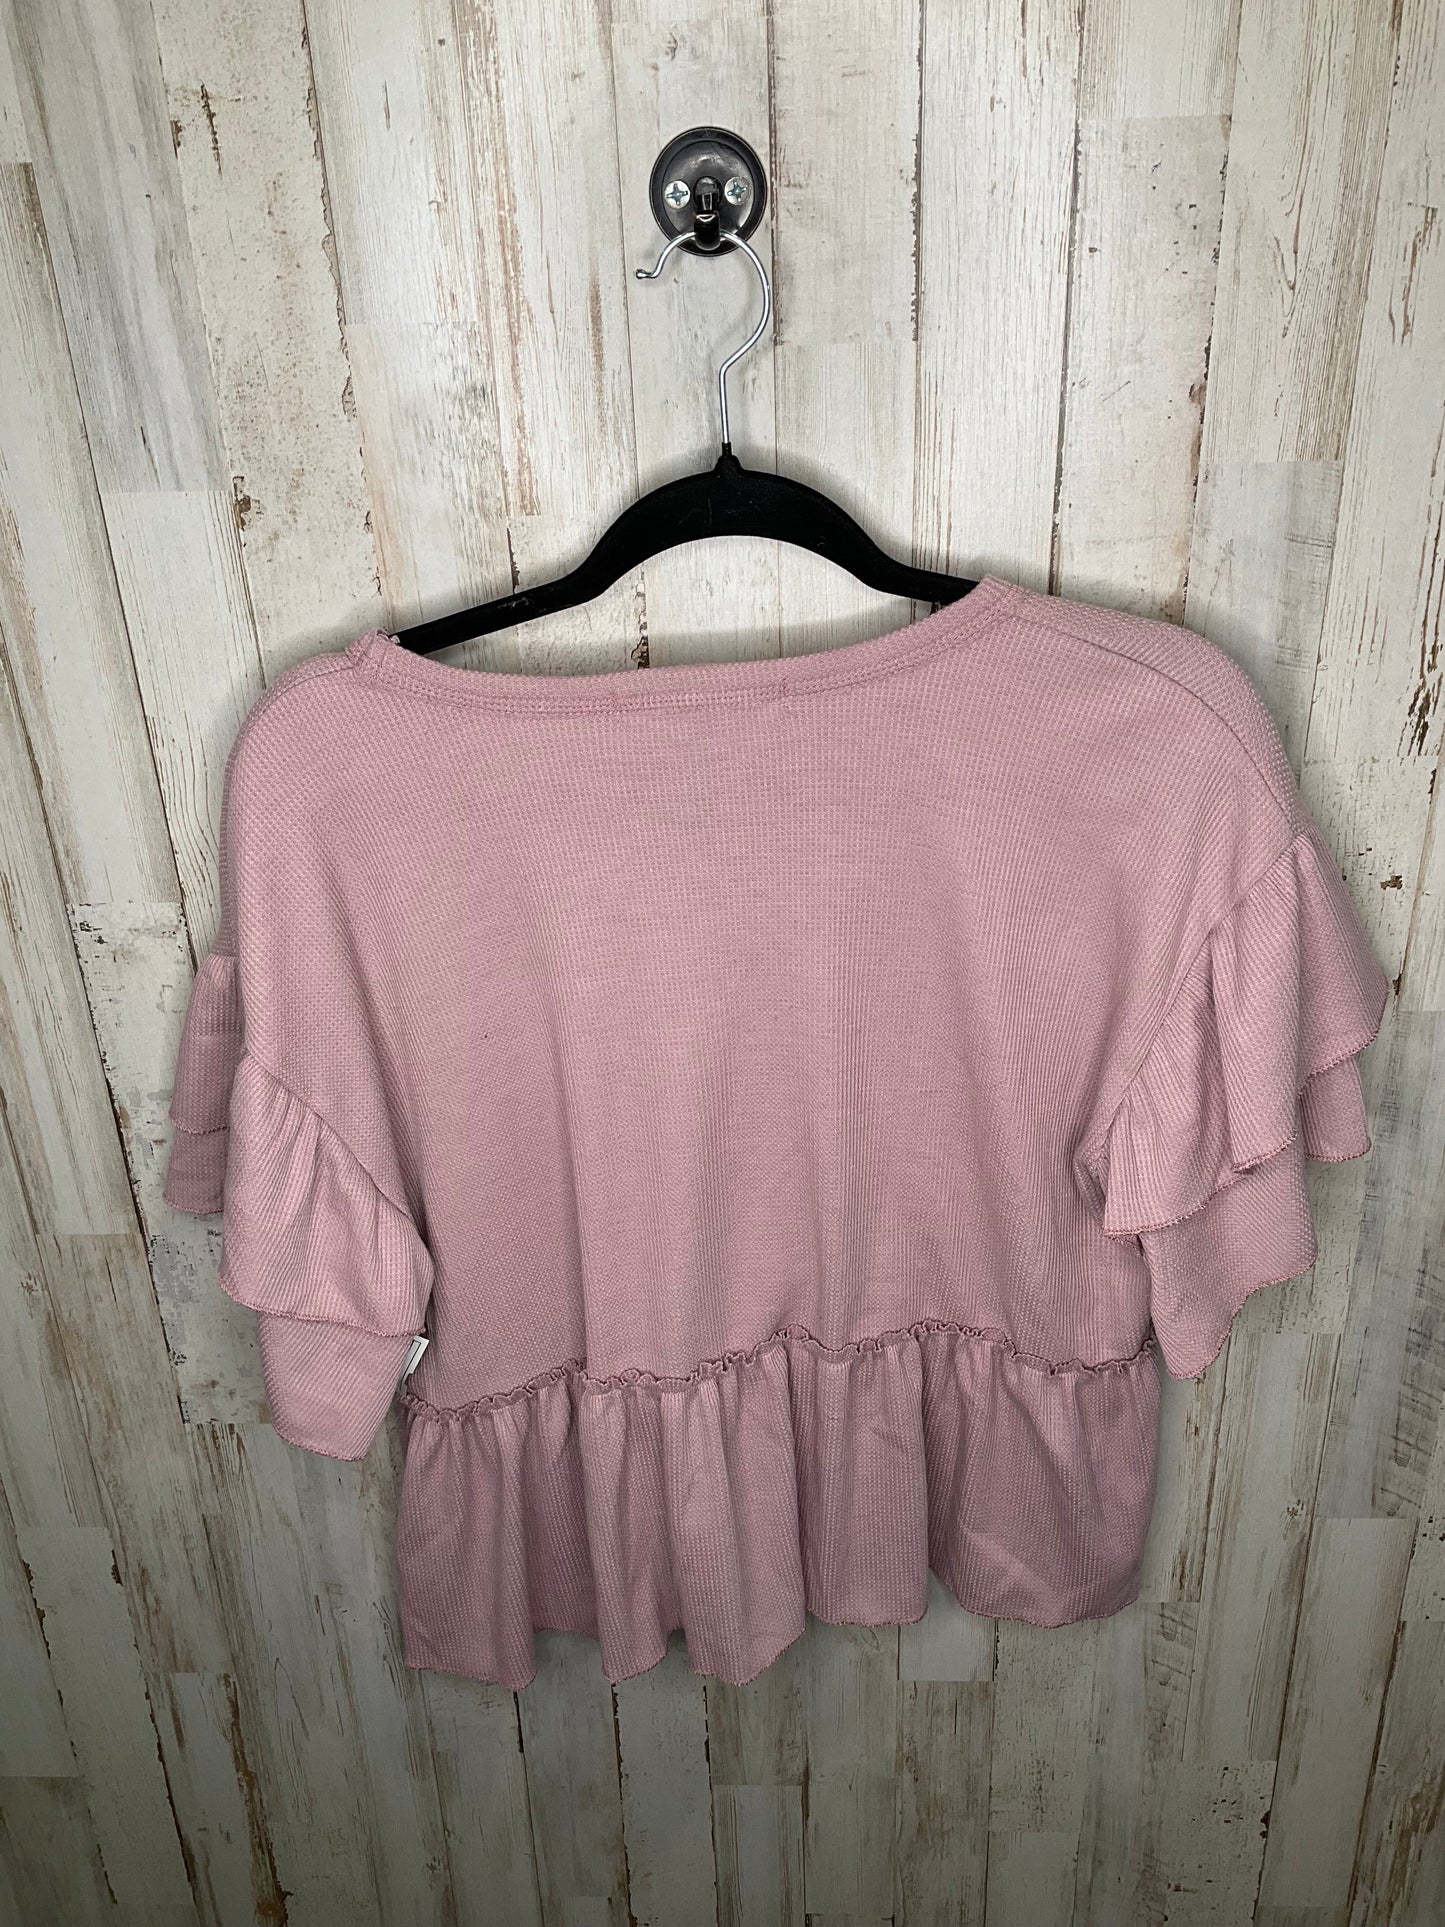 Pink Top Short Sleeve Altard State, Size Xl